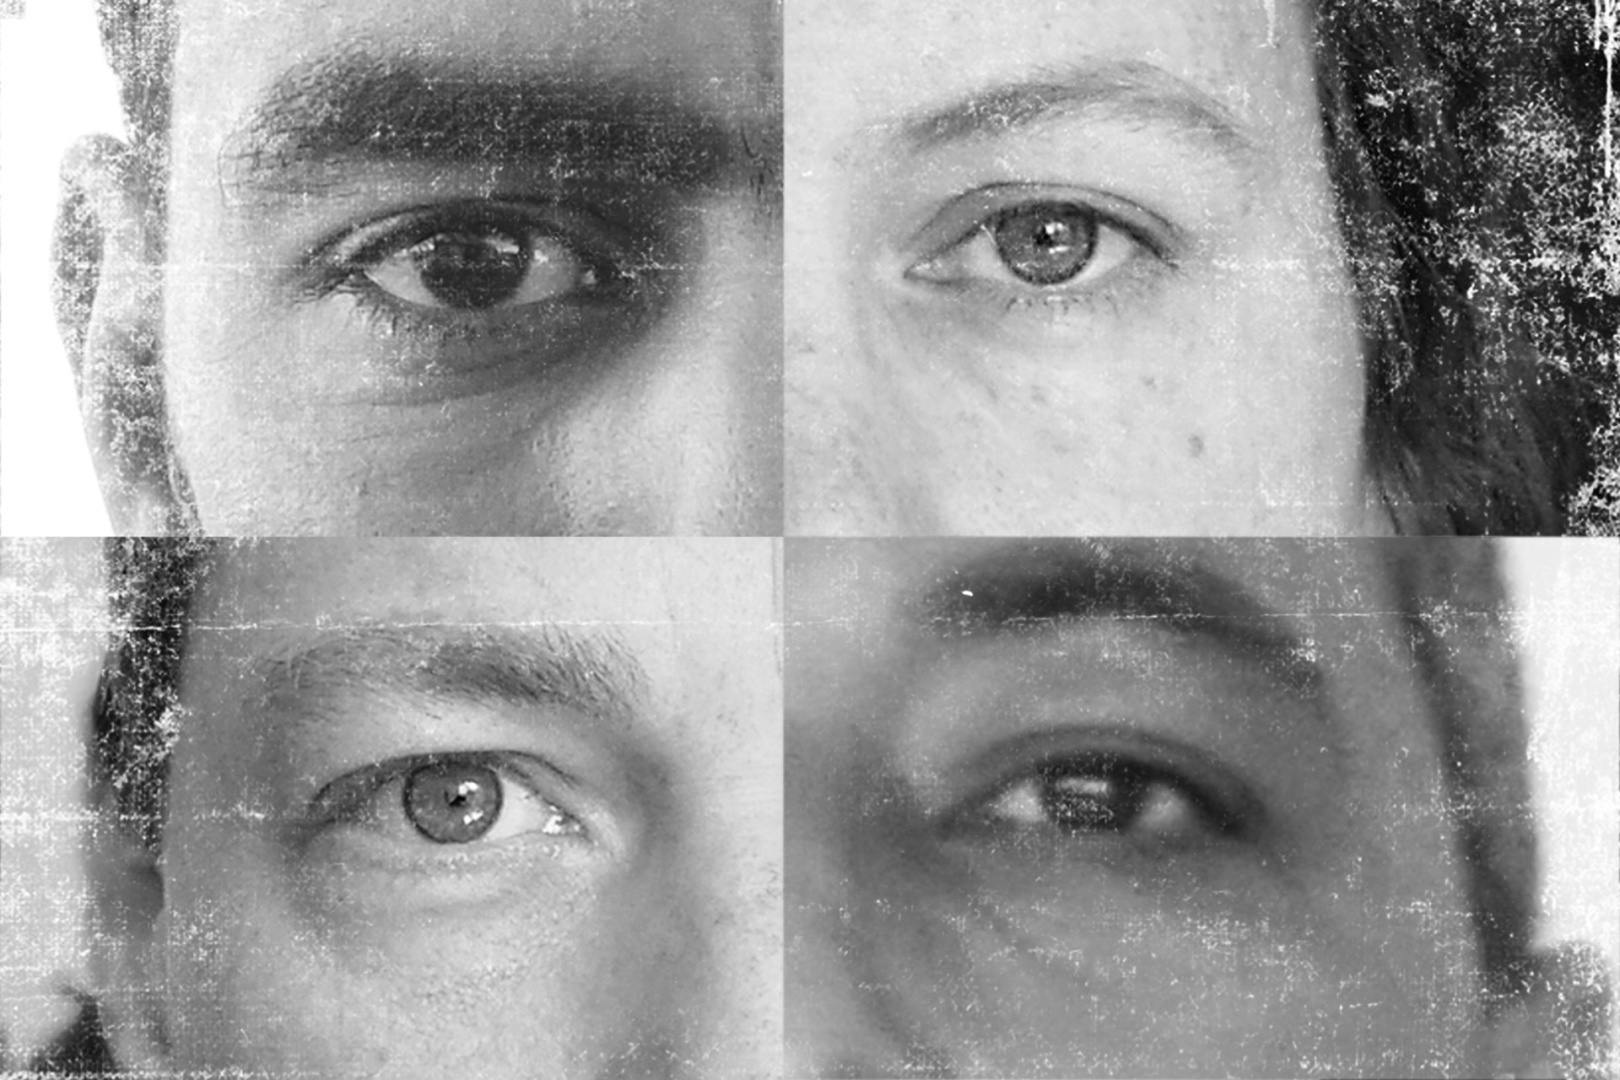 Composite of four black and white distressed images of people's eyes